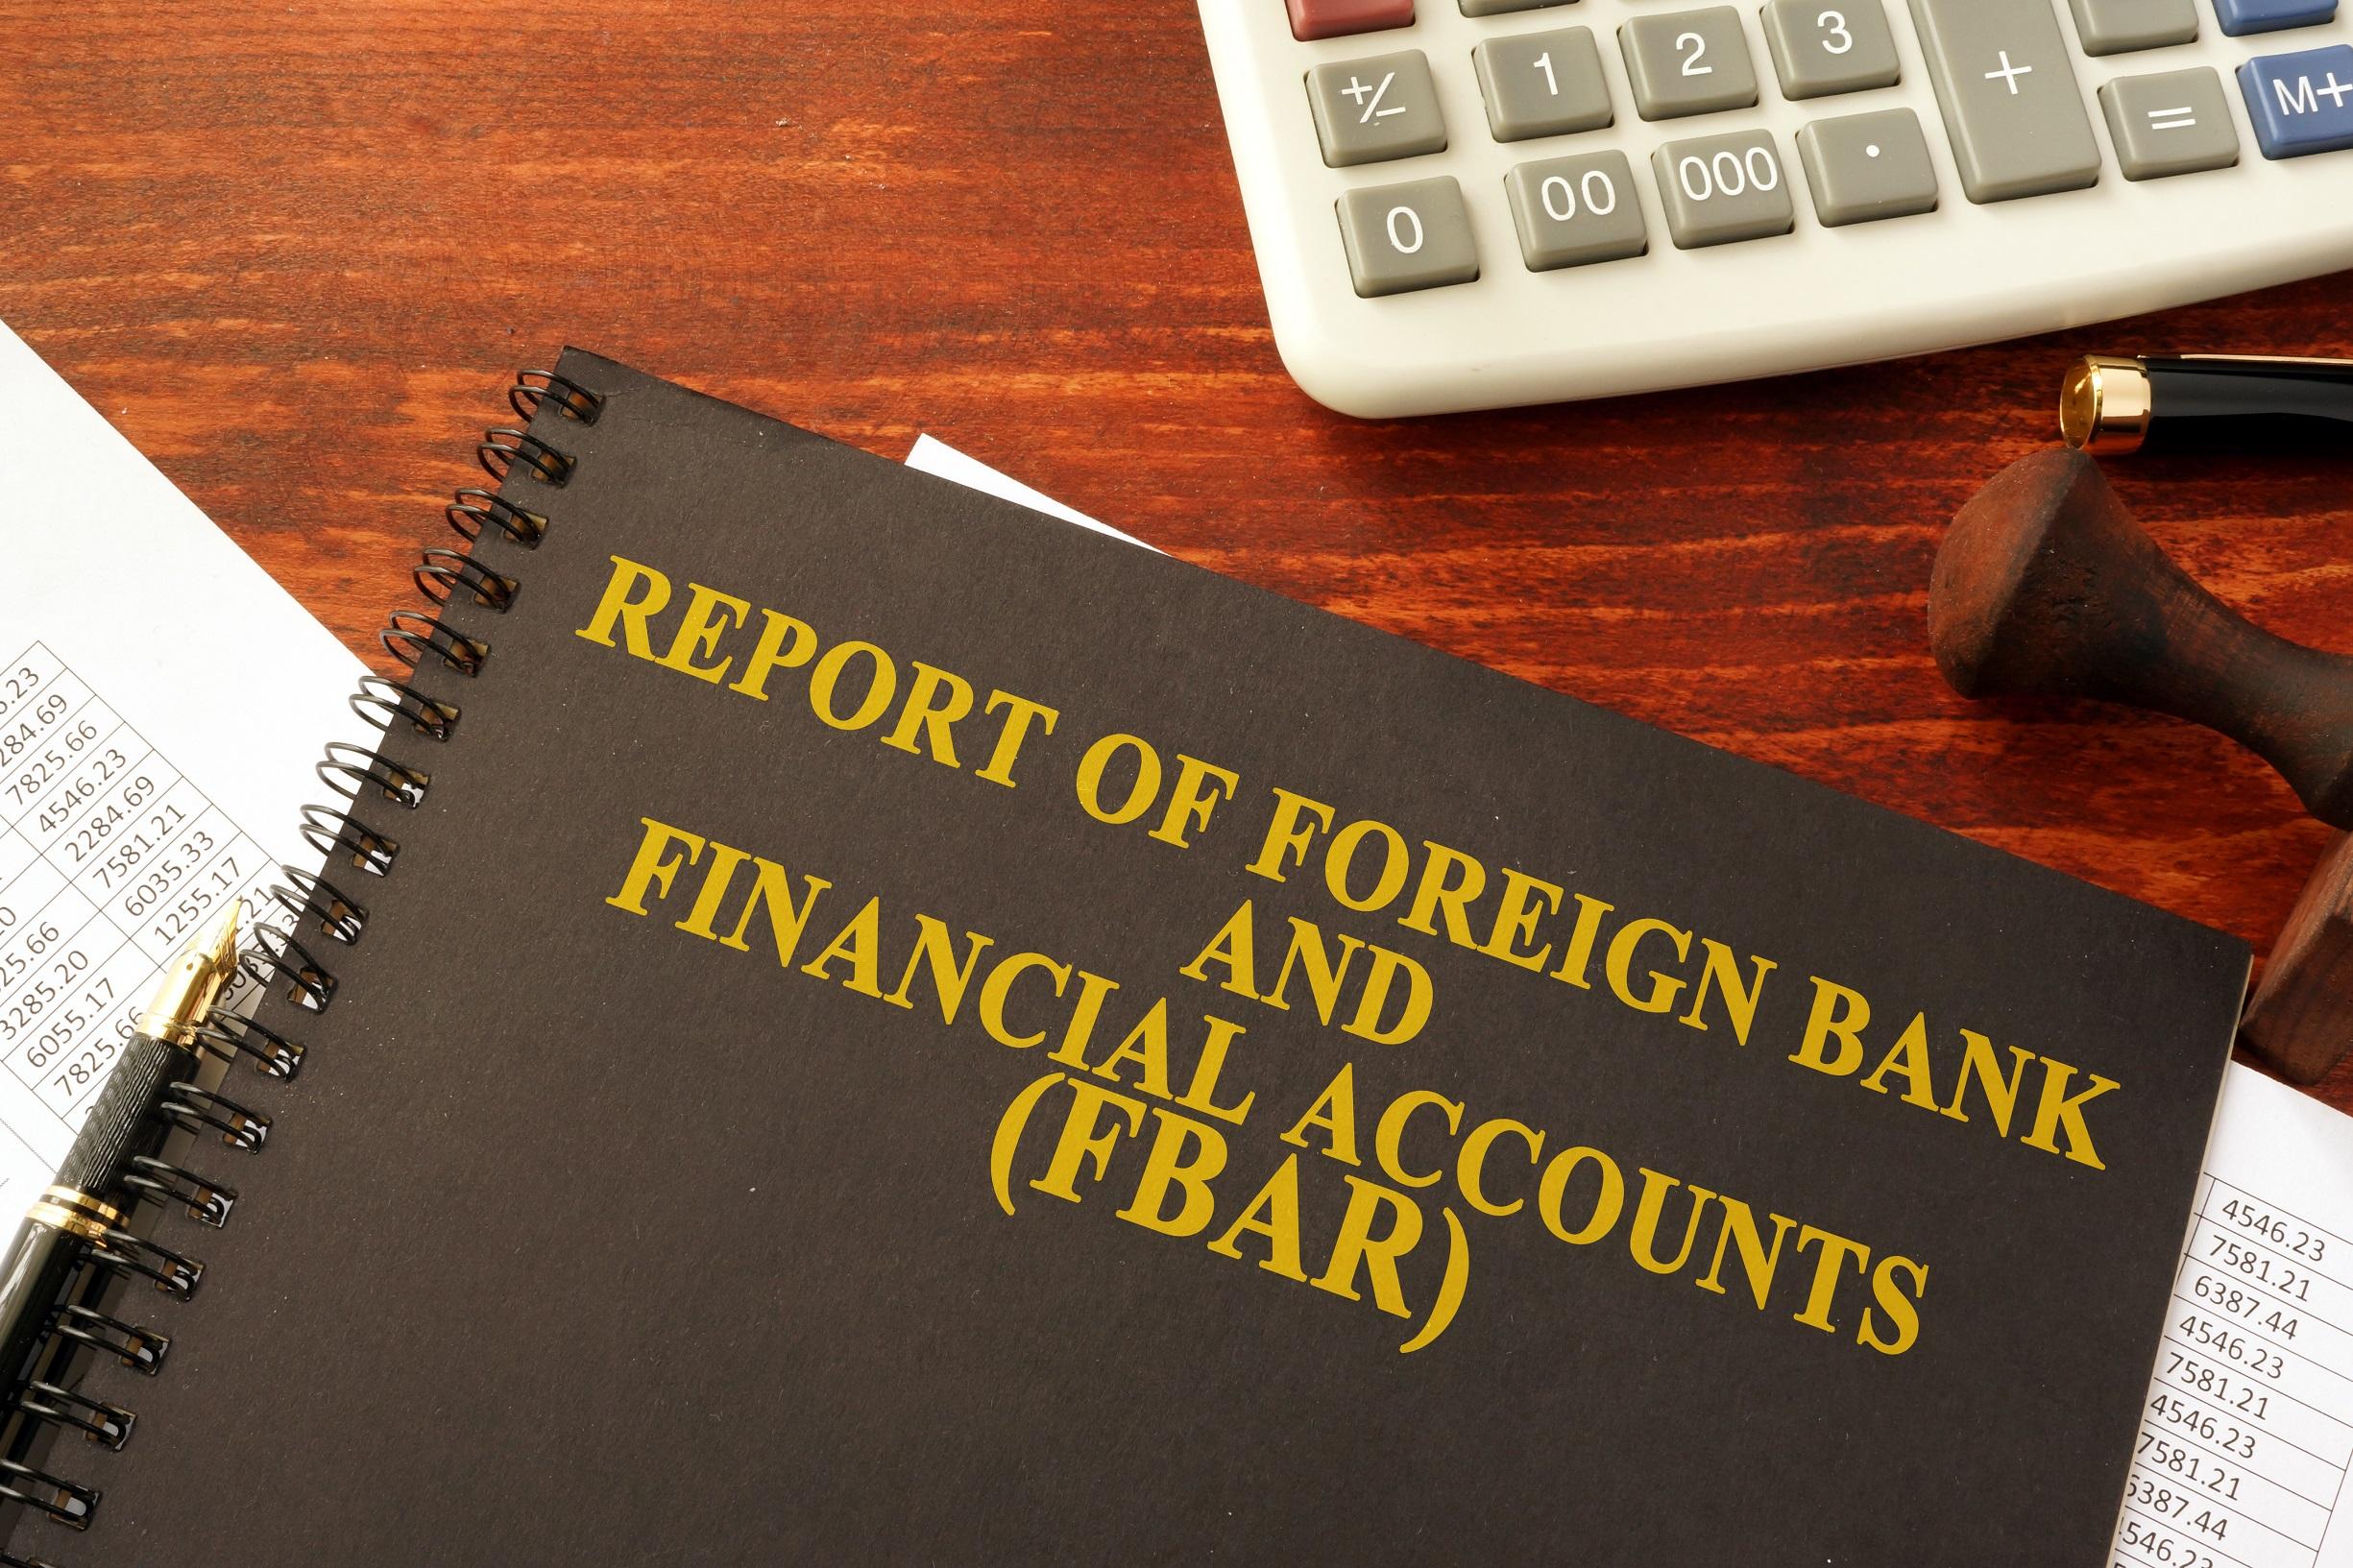 FBAR reporting for US Citizen and Residents